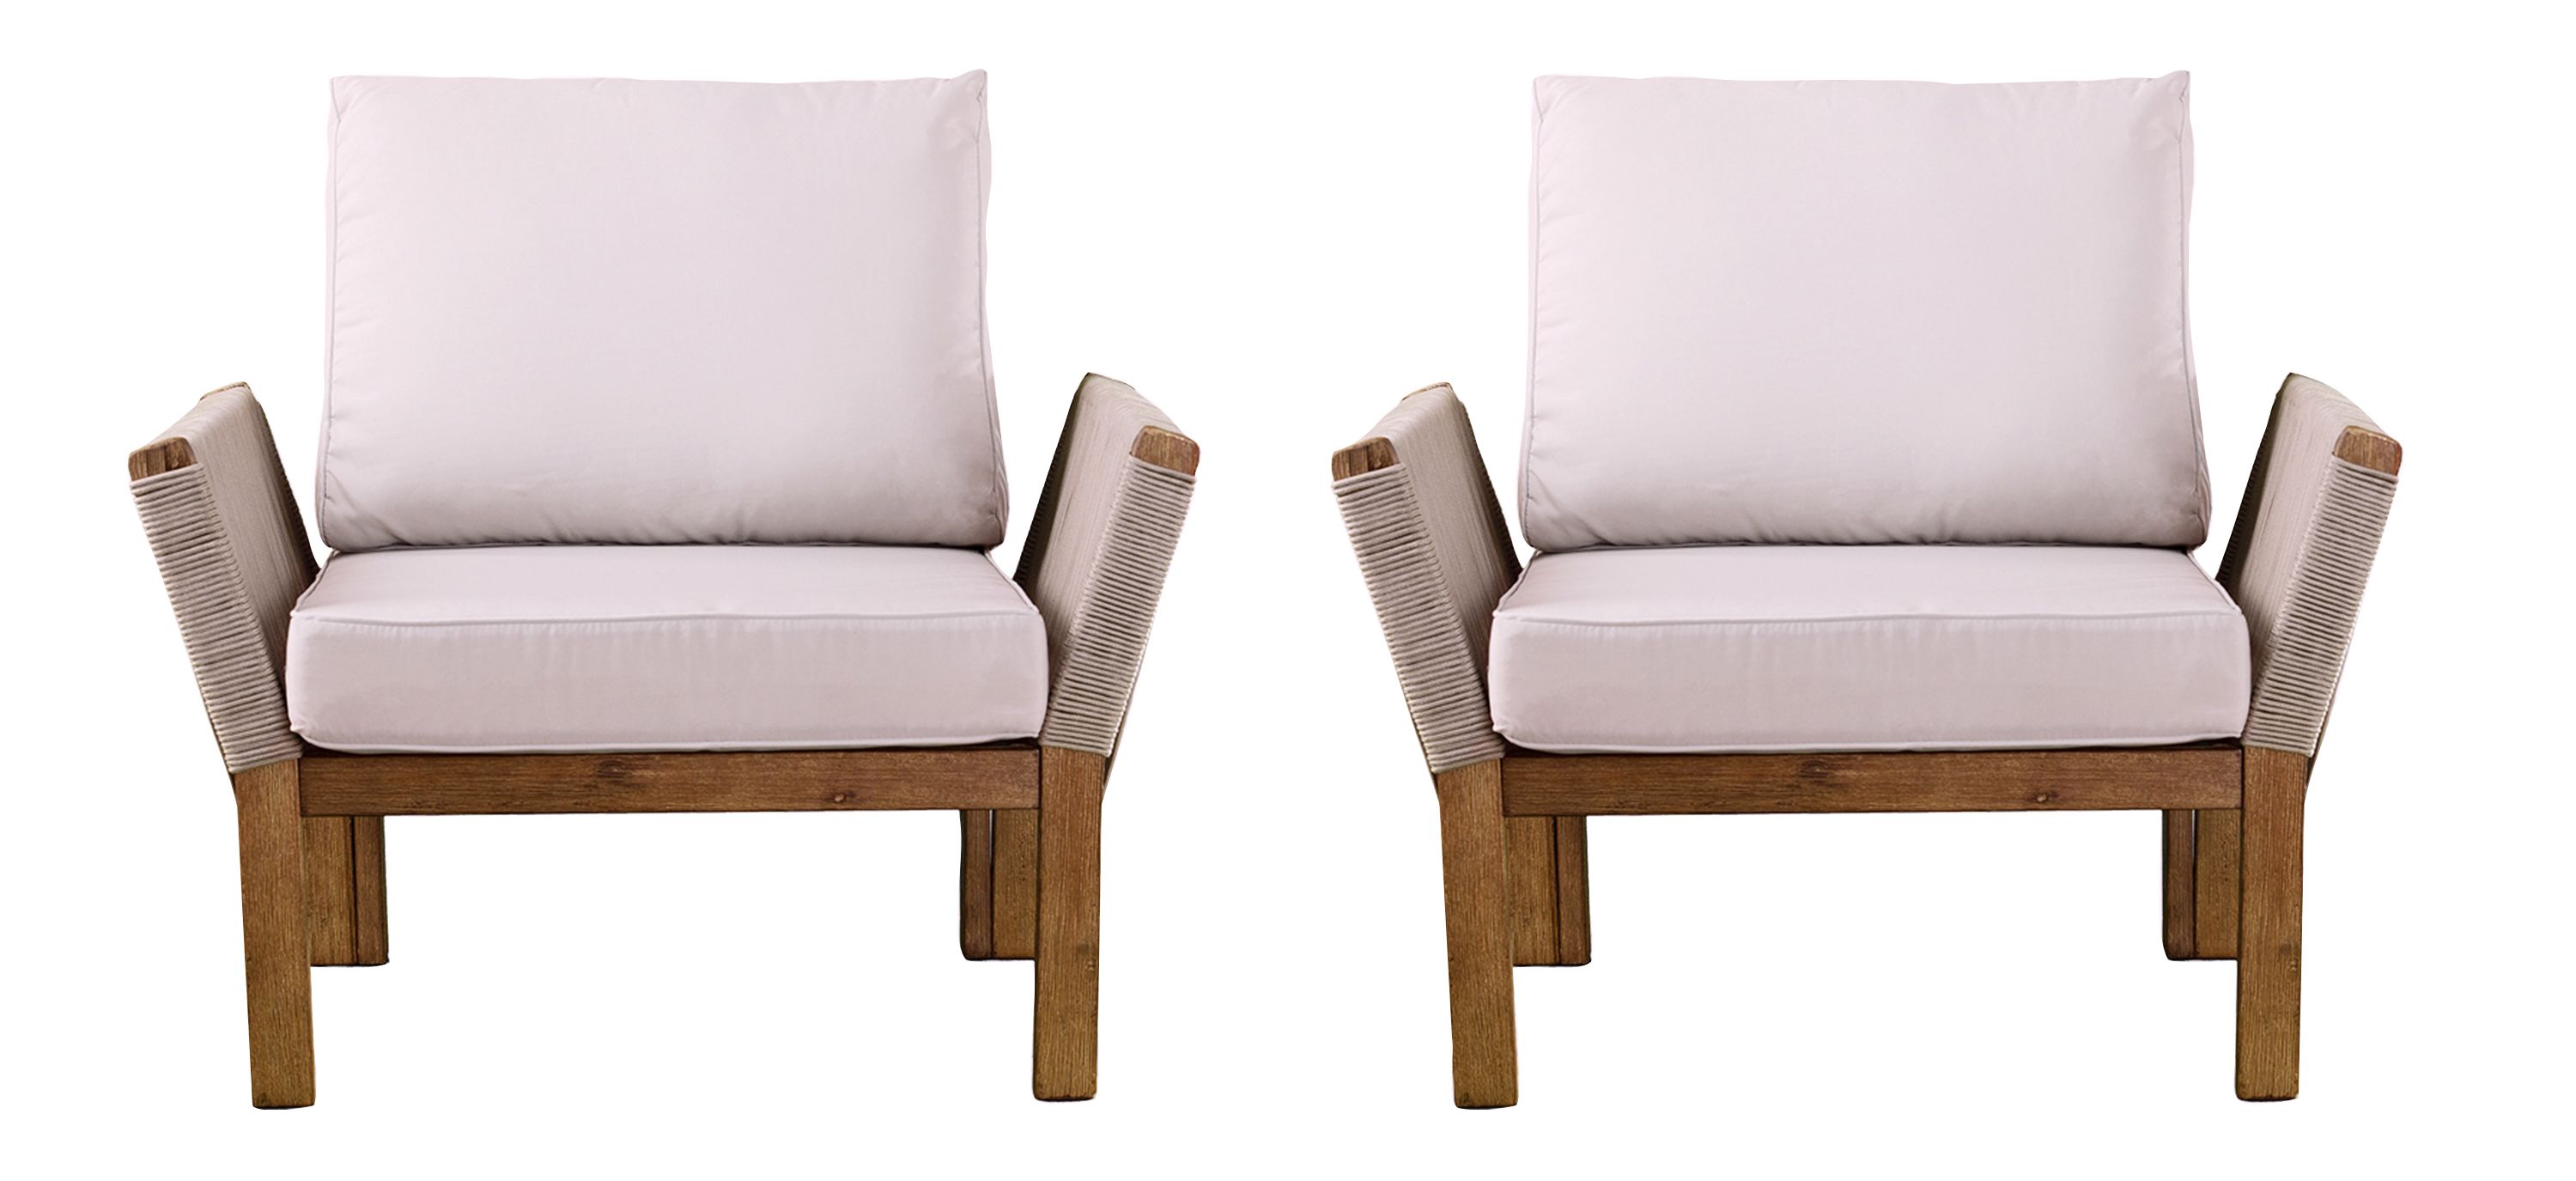 Savoy Outdoor Chairs - Set of 2